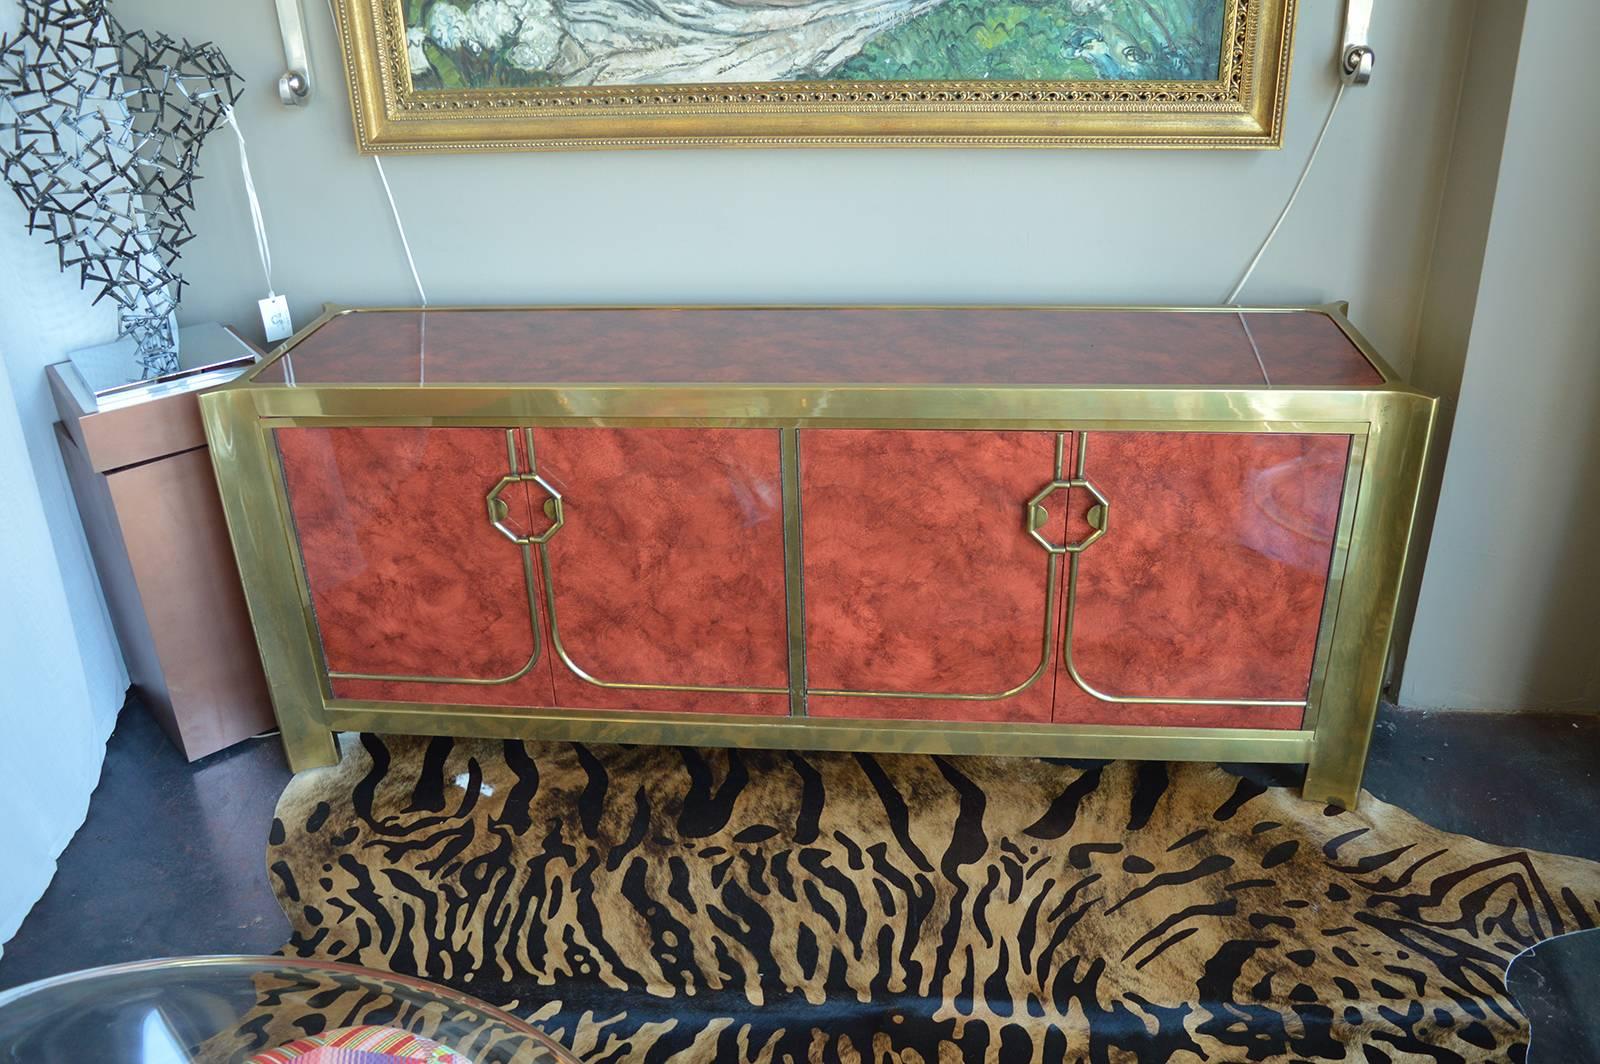 Mastercraft credenza with faux bamboo detail. With lacquer finish.